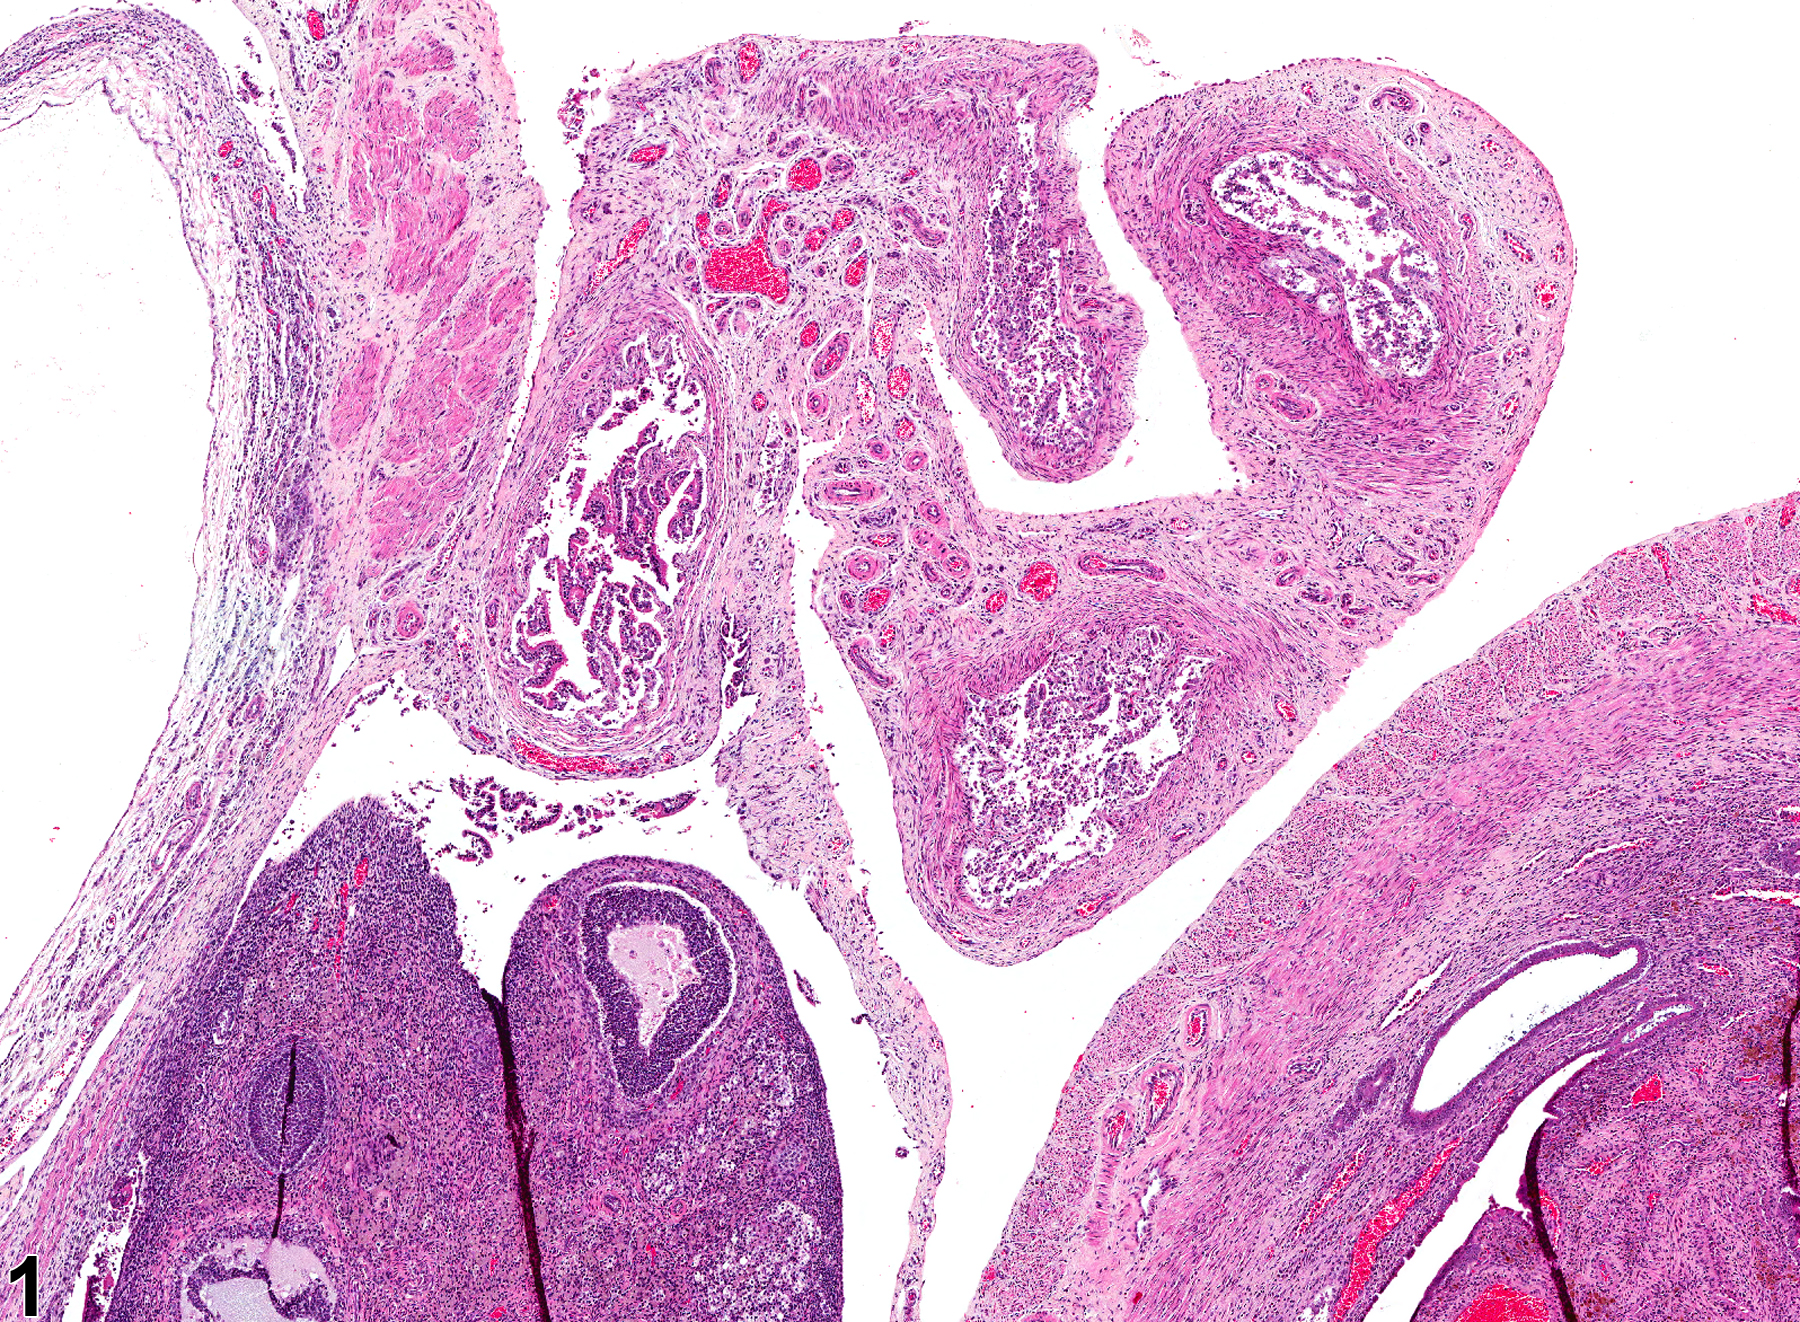 Image of necrosis in the oviduct from a female Harlan Sprague-Dawley rat in a chronic study